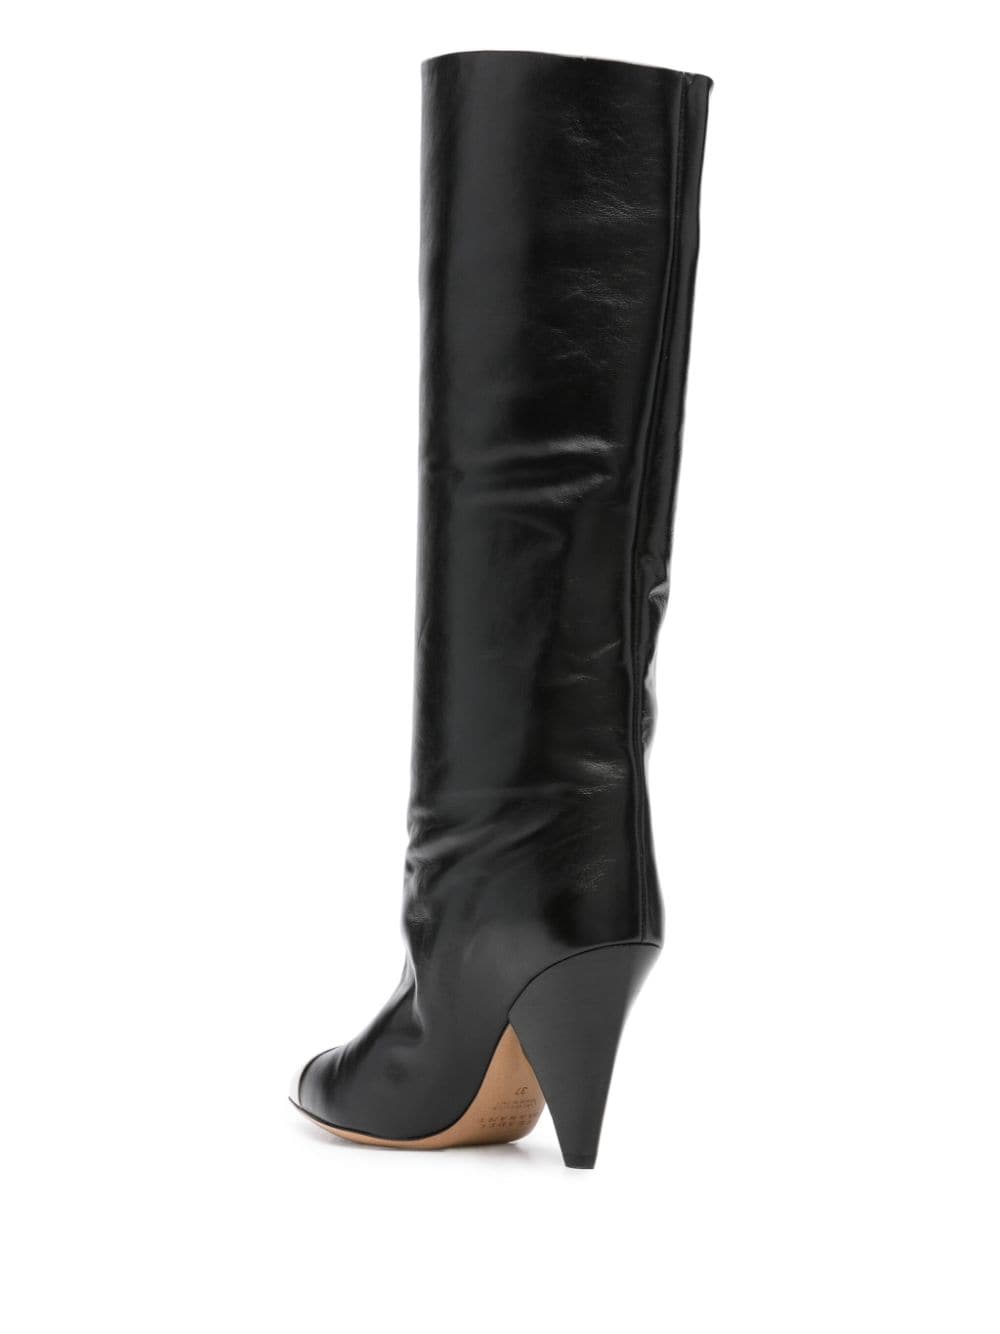 LILEZIO 95MM LEATHER KNEE-HIGH BOOTS